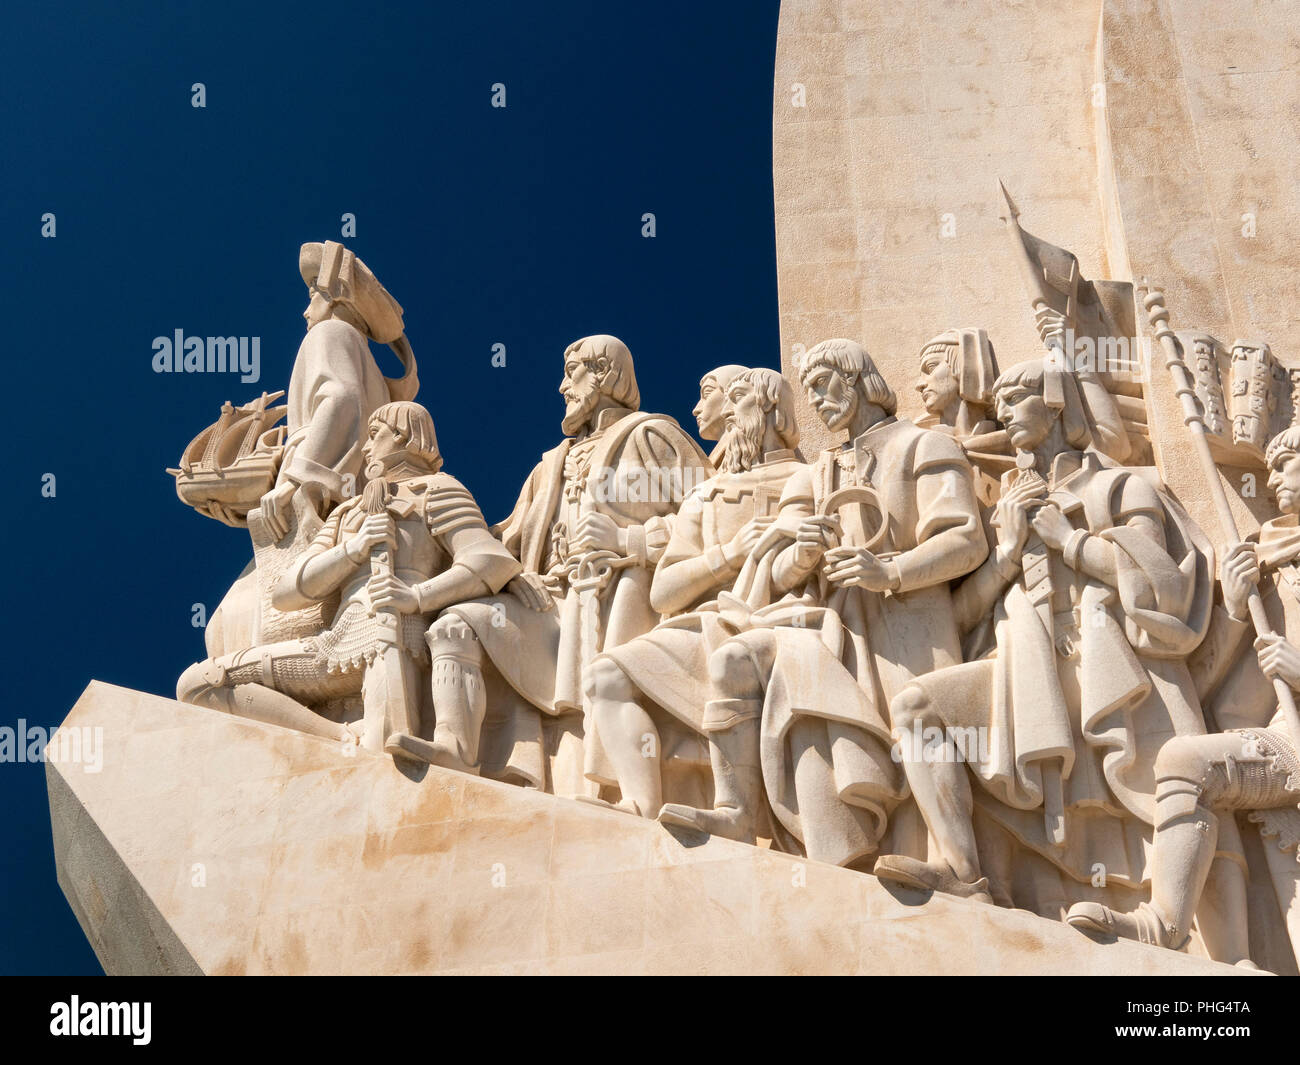 Portugal, Lisbon, Belem, Padrao dos Deccobrimentos, the discoveries monument, memorial to seafaring explorers, statues detail Stock Photo